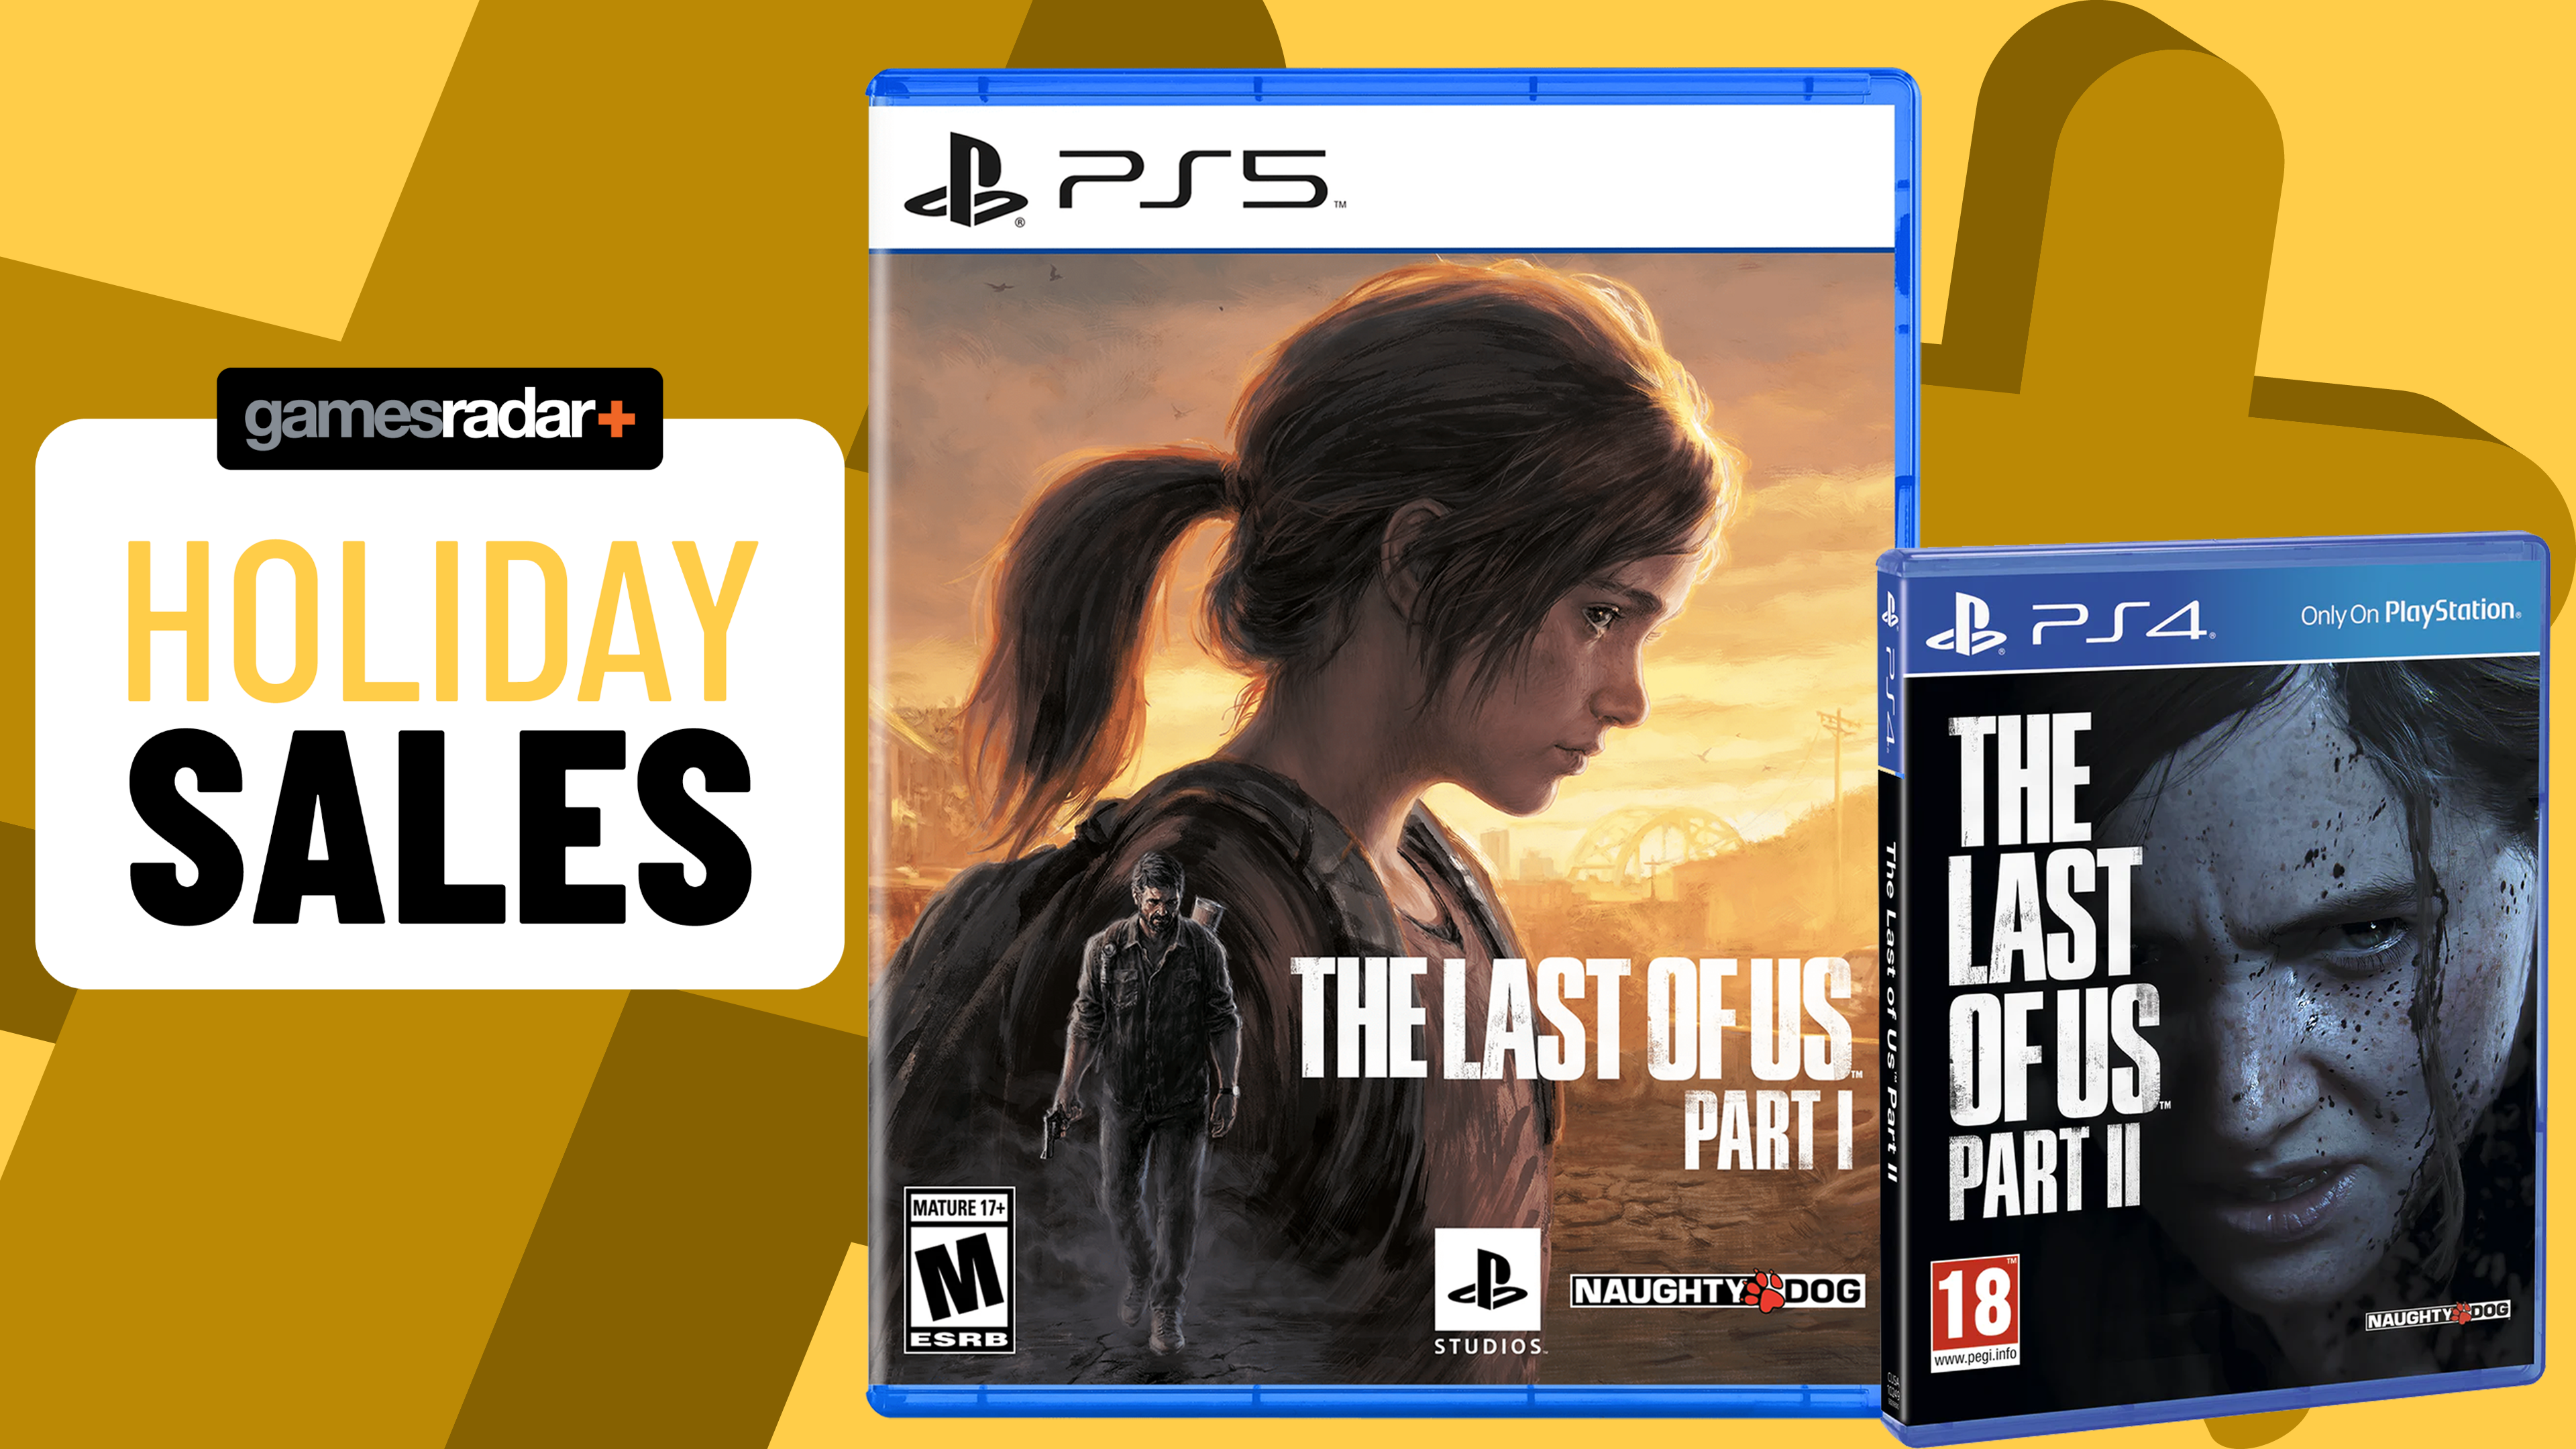 La Promotion on X: Game The Last Of Us Part I - PS5 - R$ 89,99